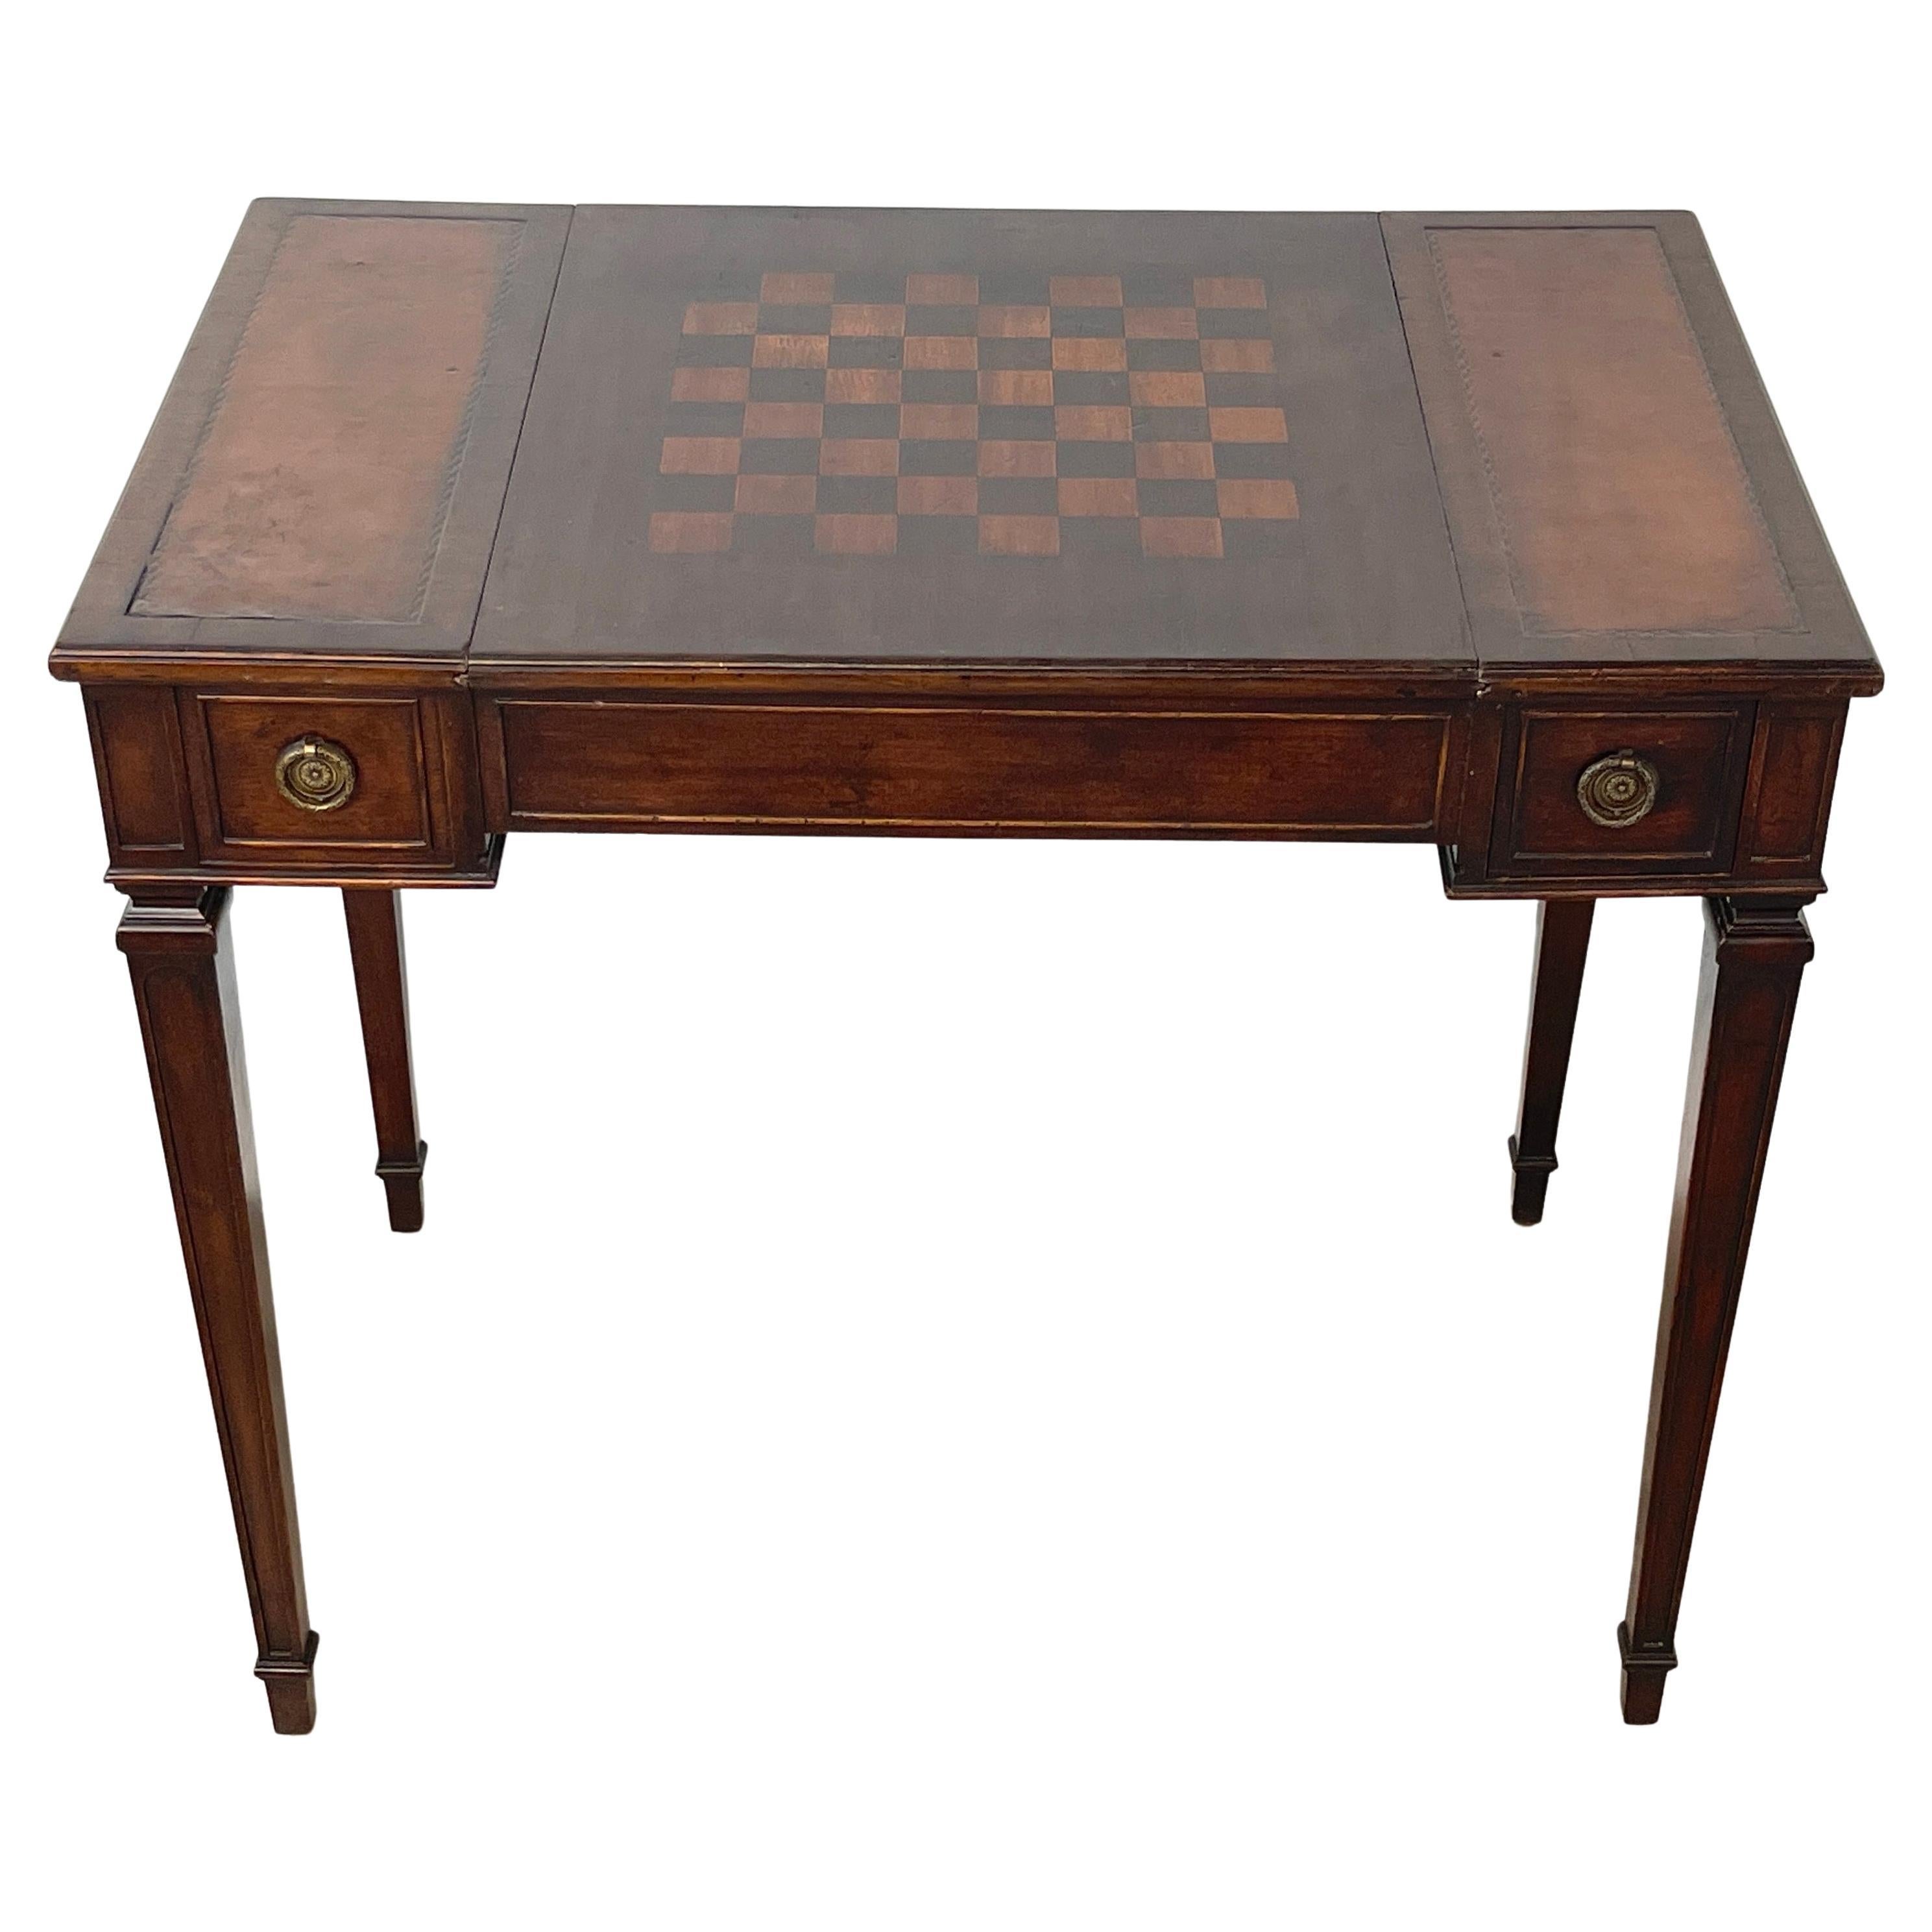 Diminutive French Neoclassical Inlaid Mahogany Games Table For Sale